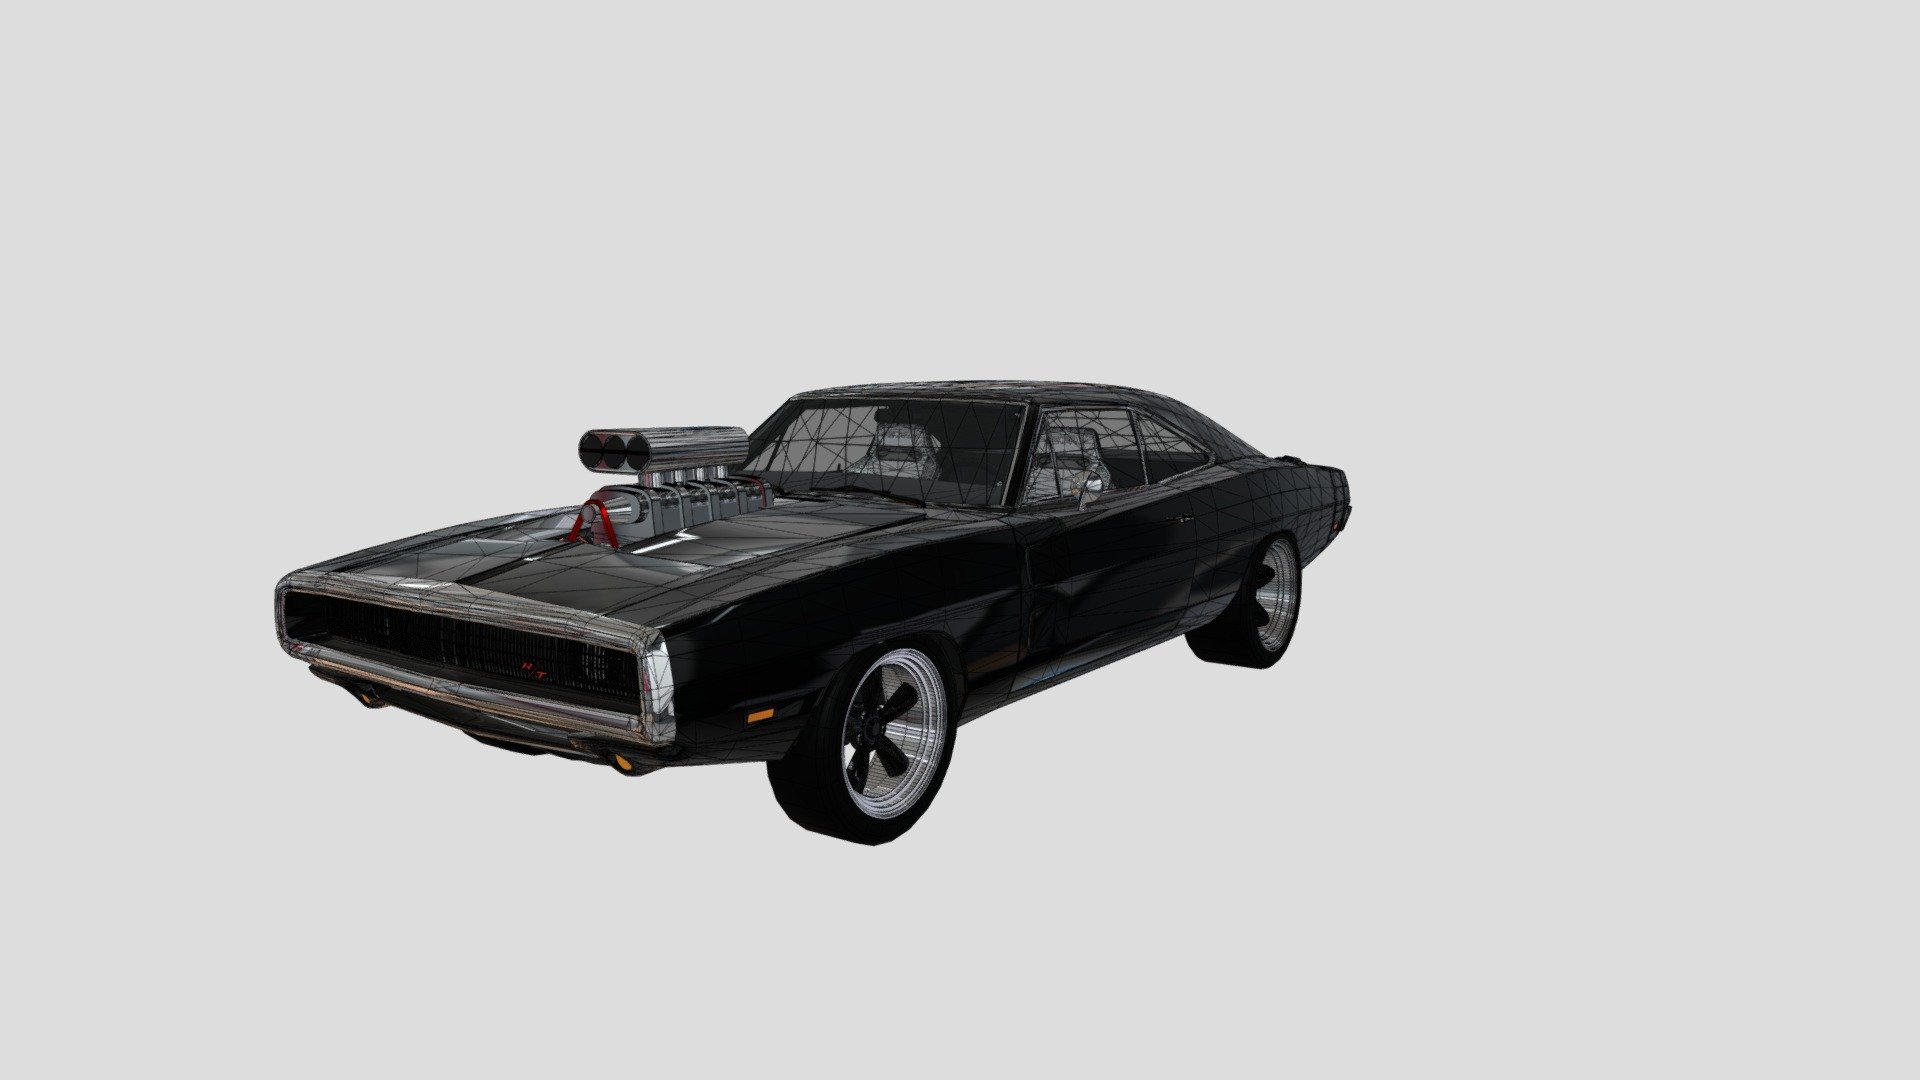 Dominic Toretto's 1970 Dodge Charger R/T in FAST X

FAST X | Official Trailer - Dominic Toretto's 1970 Dodge Charger R/T FAST X - Download Free 3D model by Emmanual Robinson, Jr. (@3001105) 3d model